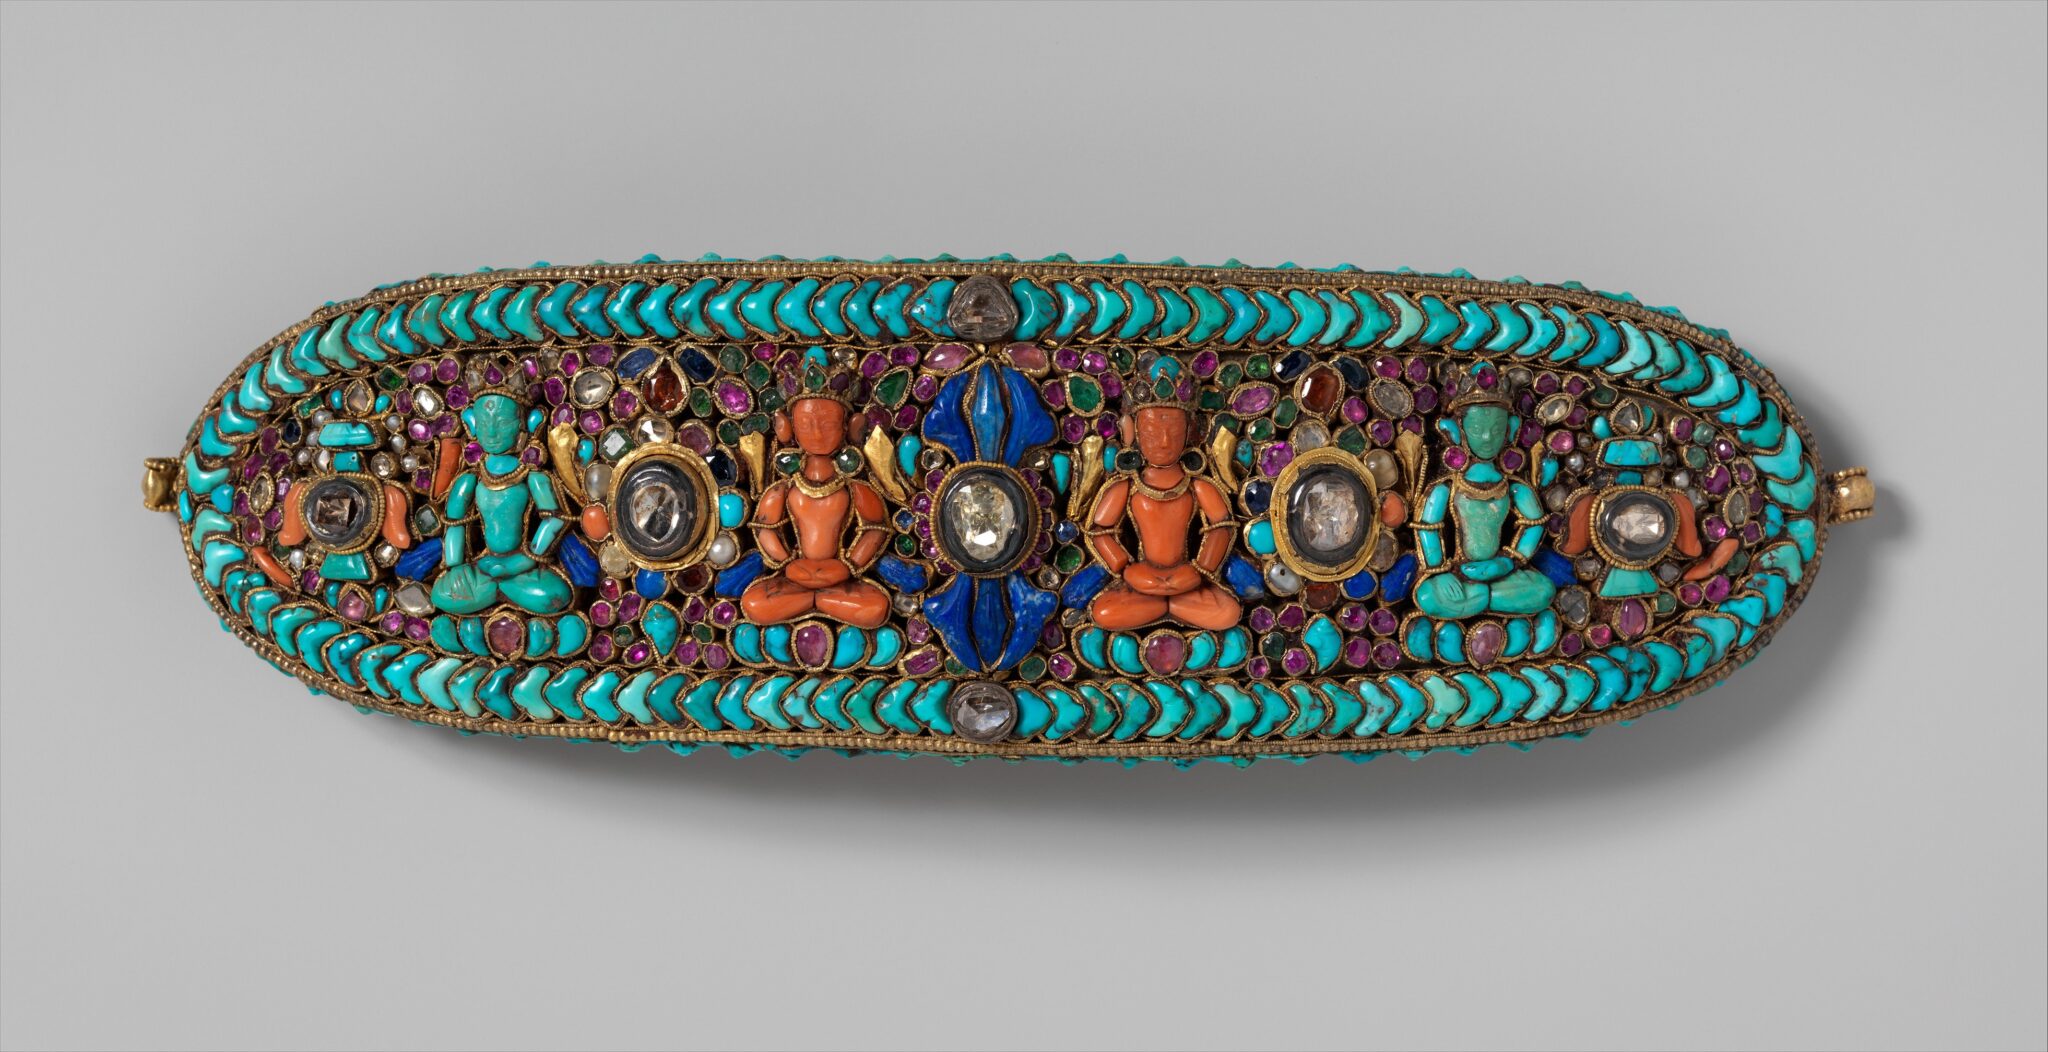 Elliptical ornament depicting four seated deities and vajra; set in turquoise, orange, blue, and purple stones